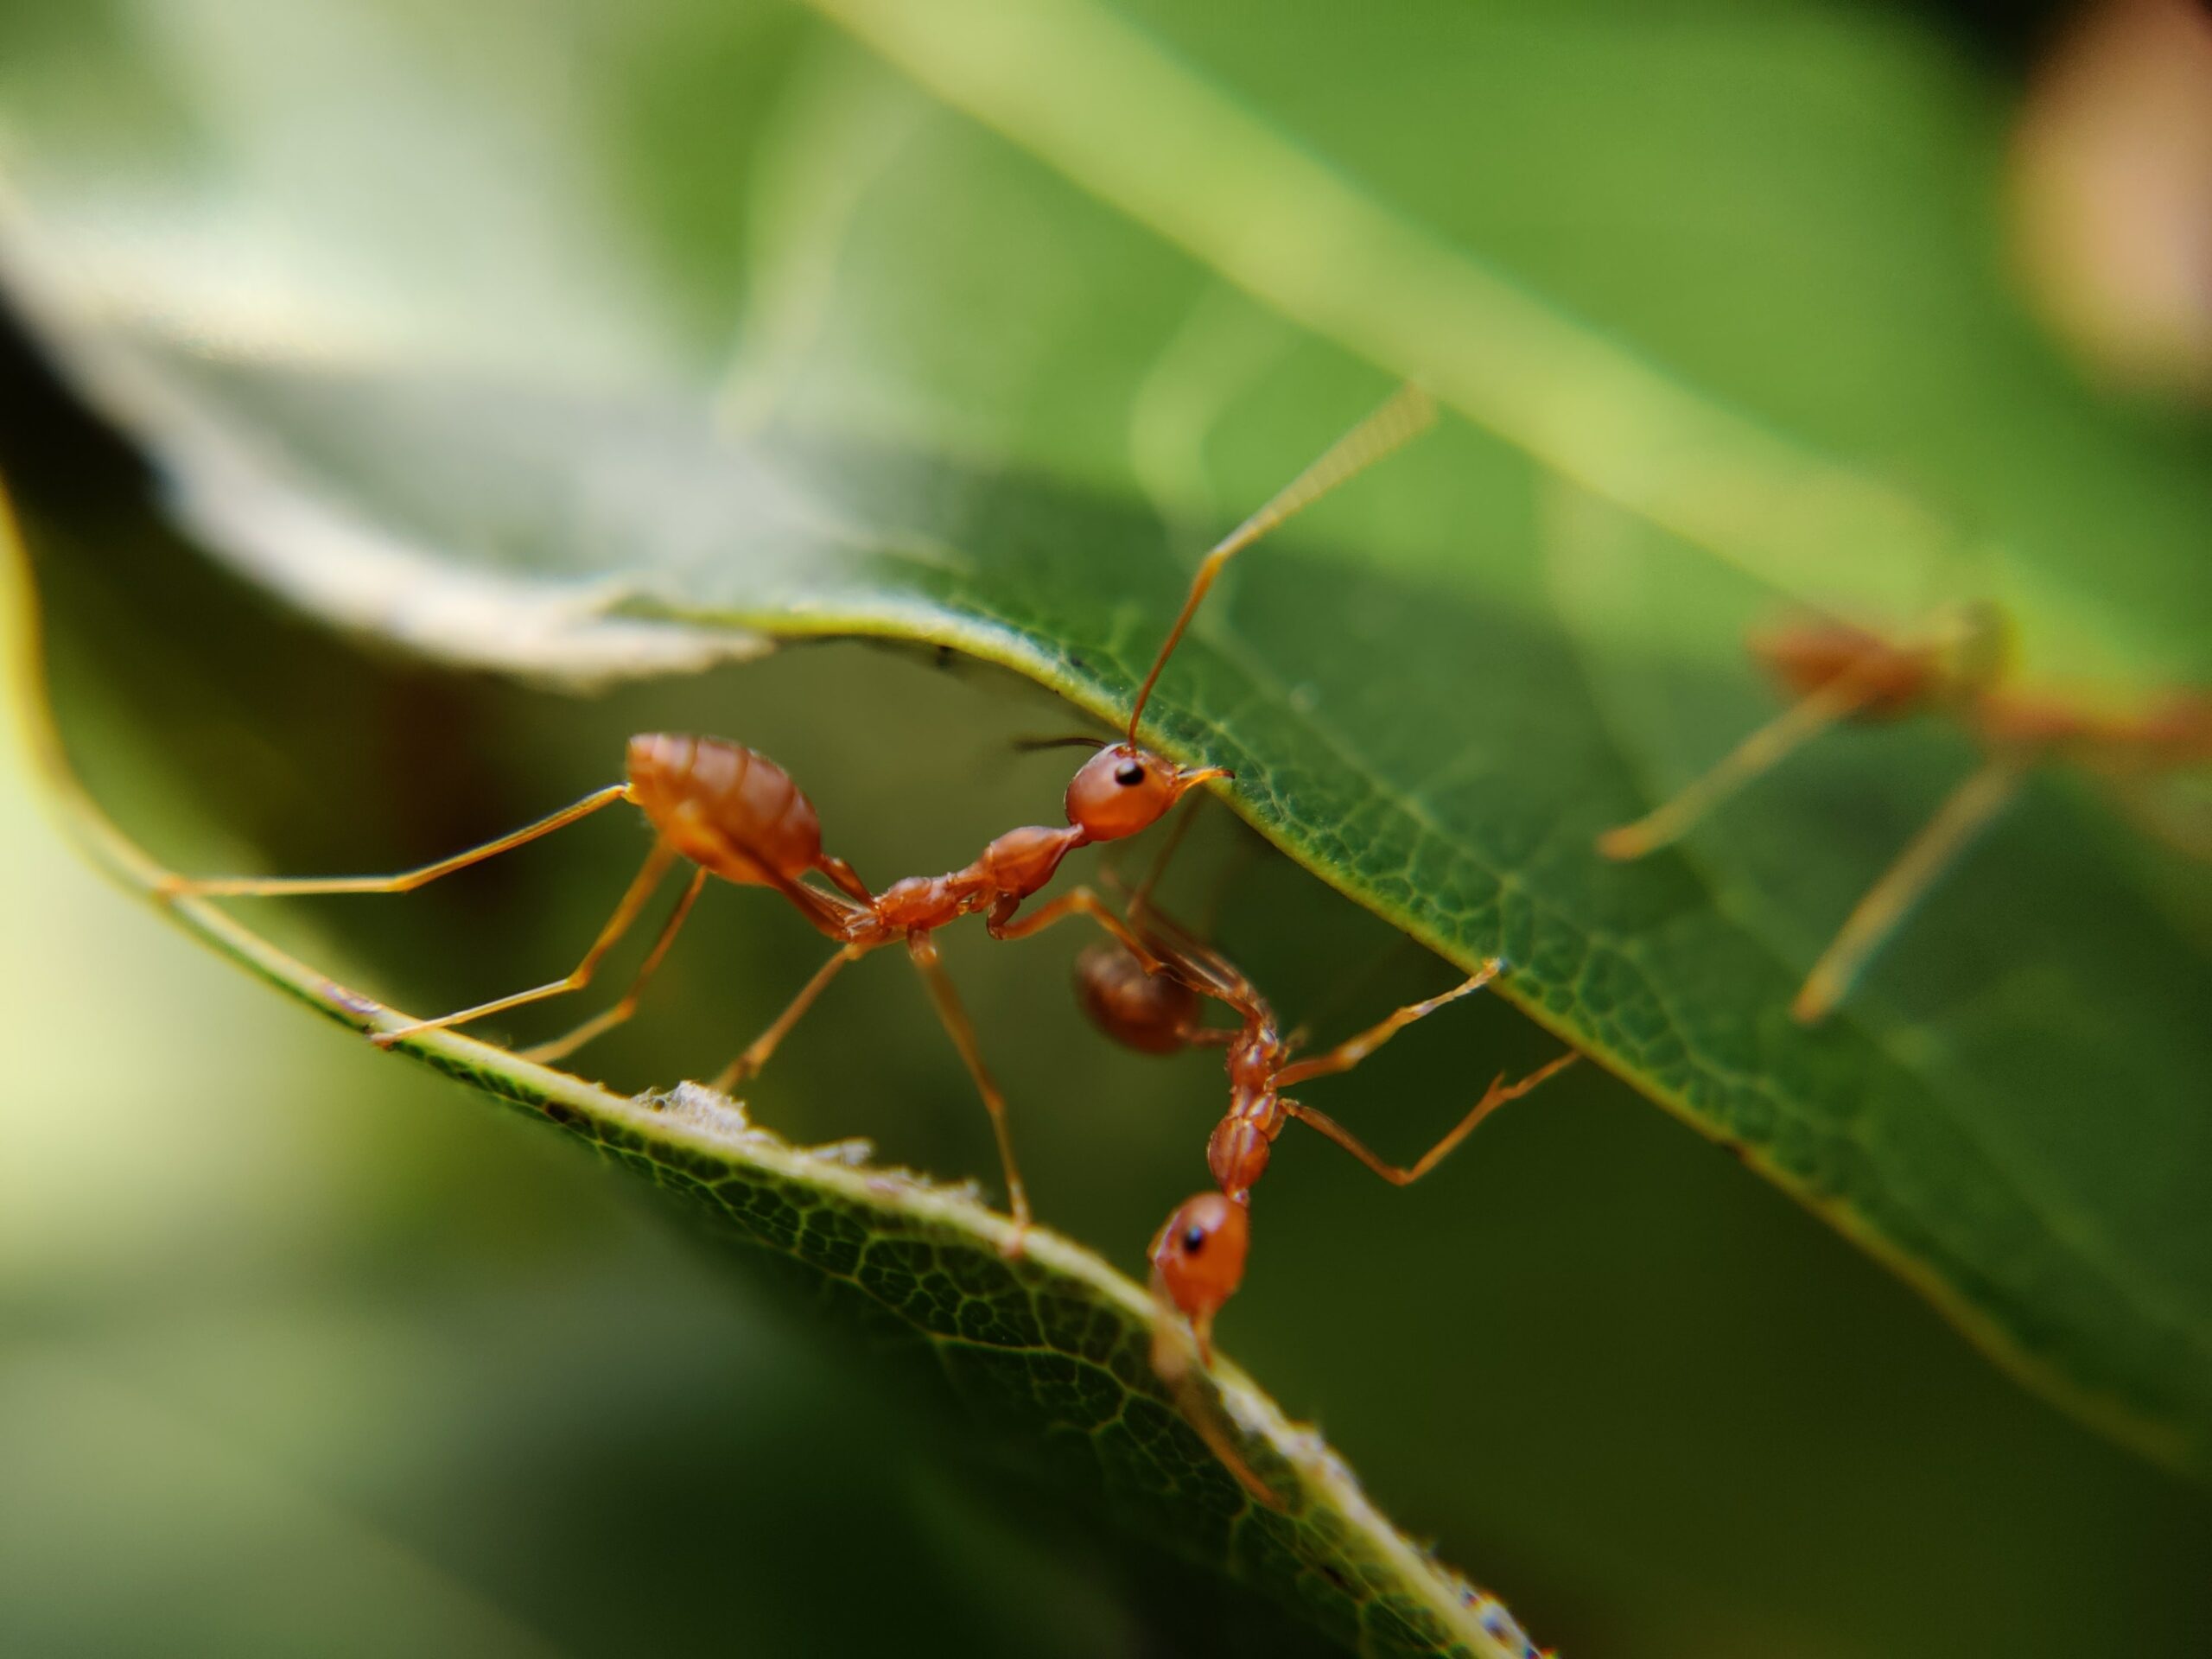 ant removal company and pest control edmonton, how to prevent ants edmonton